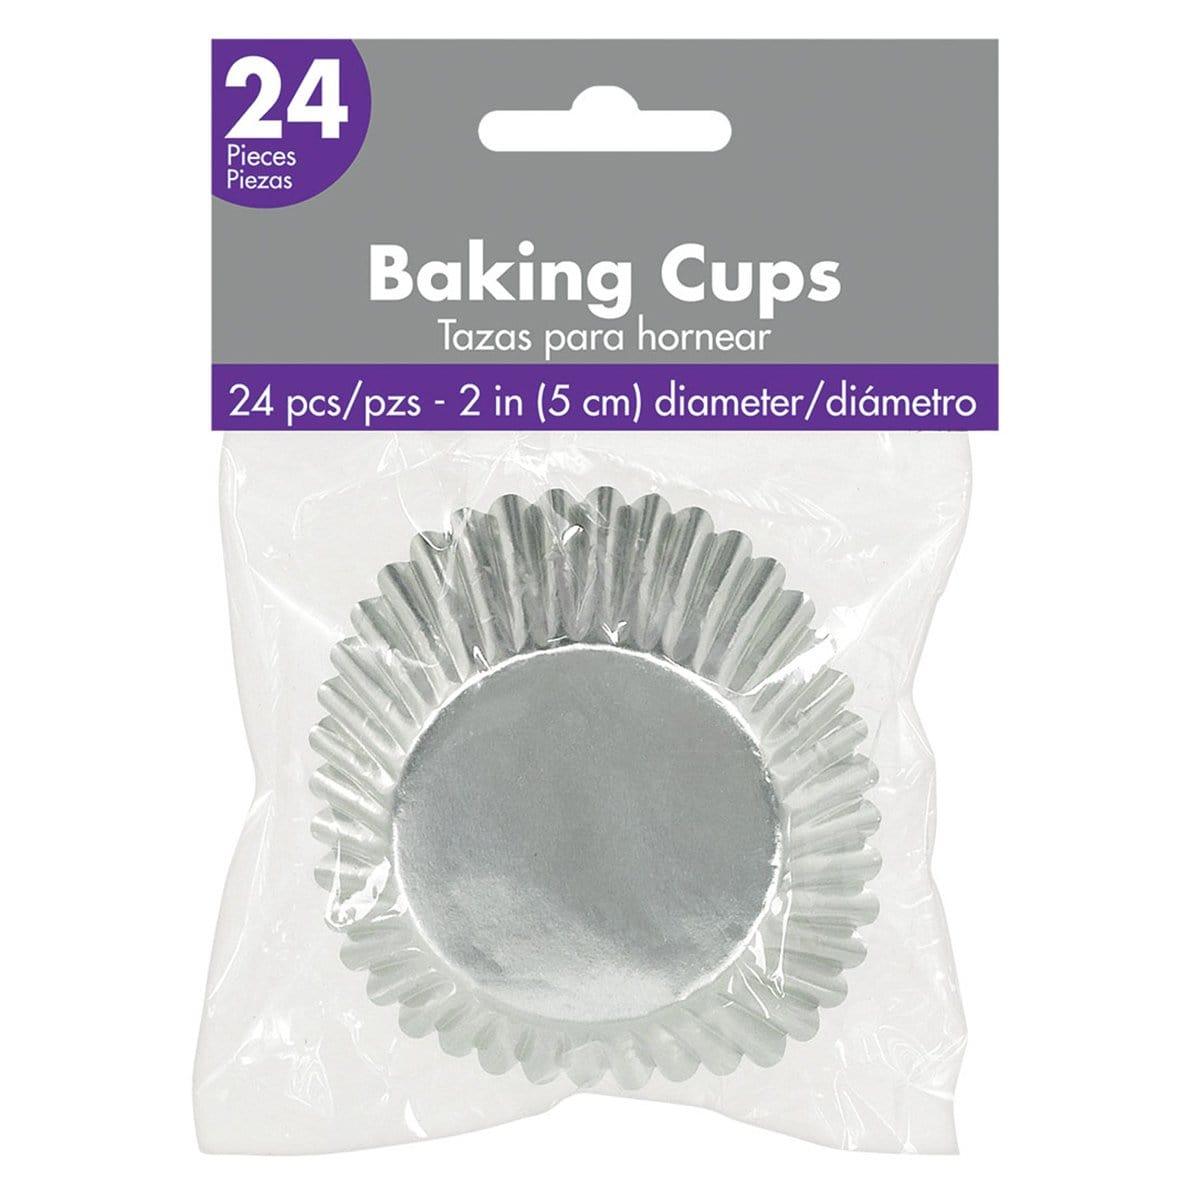 Buy Cake Supplies Cupcake Cases 24/pkg - Silver sold at Party Expert